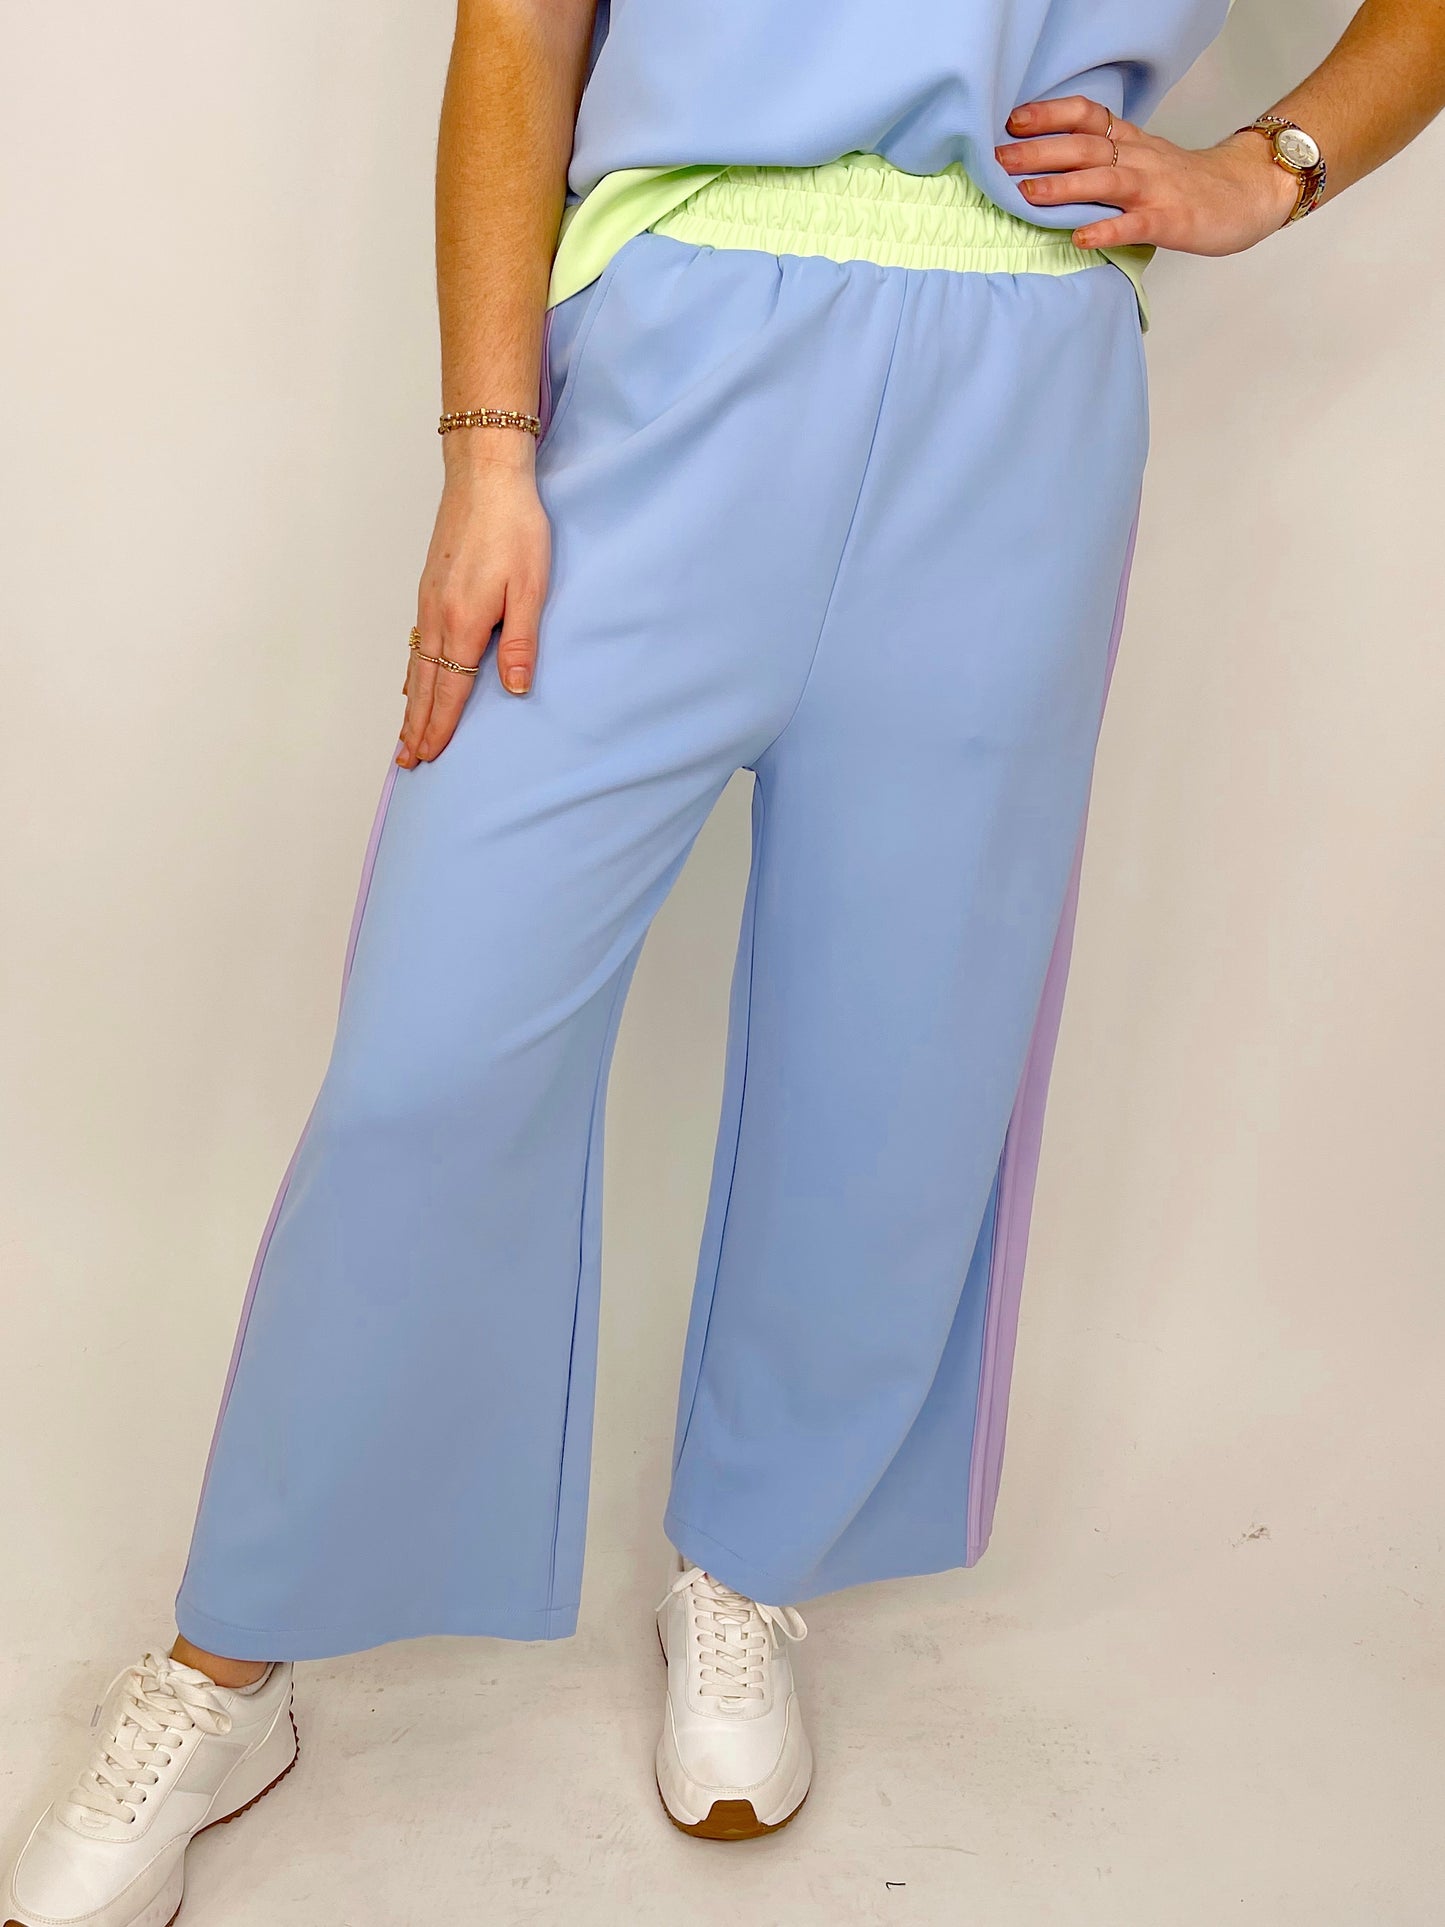 The Jolie Pant Set-Matching Set-Why Dress-The Village Shoppe, Women’s Fashion Boutique, Shop Online and In Store - Located in Muscle Shoals, AL.